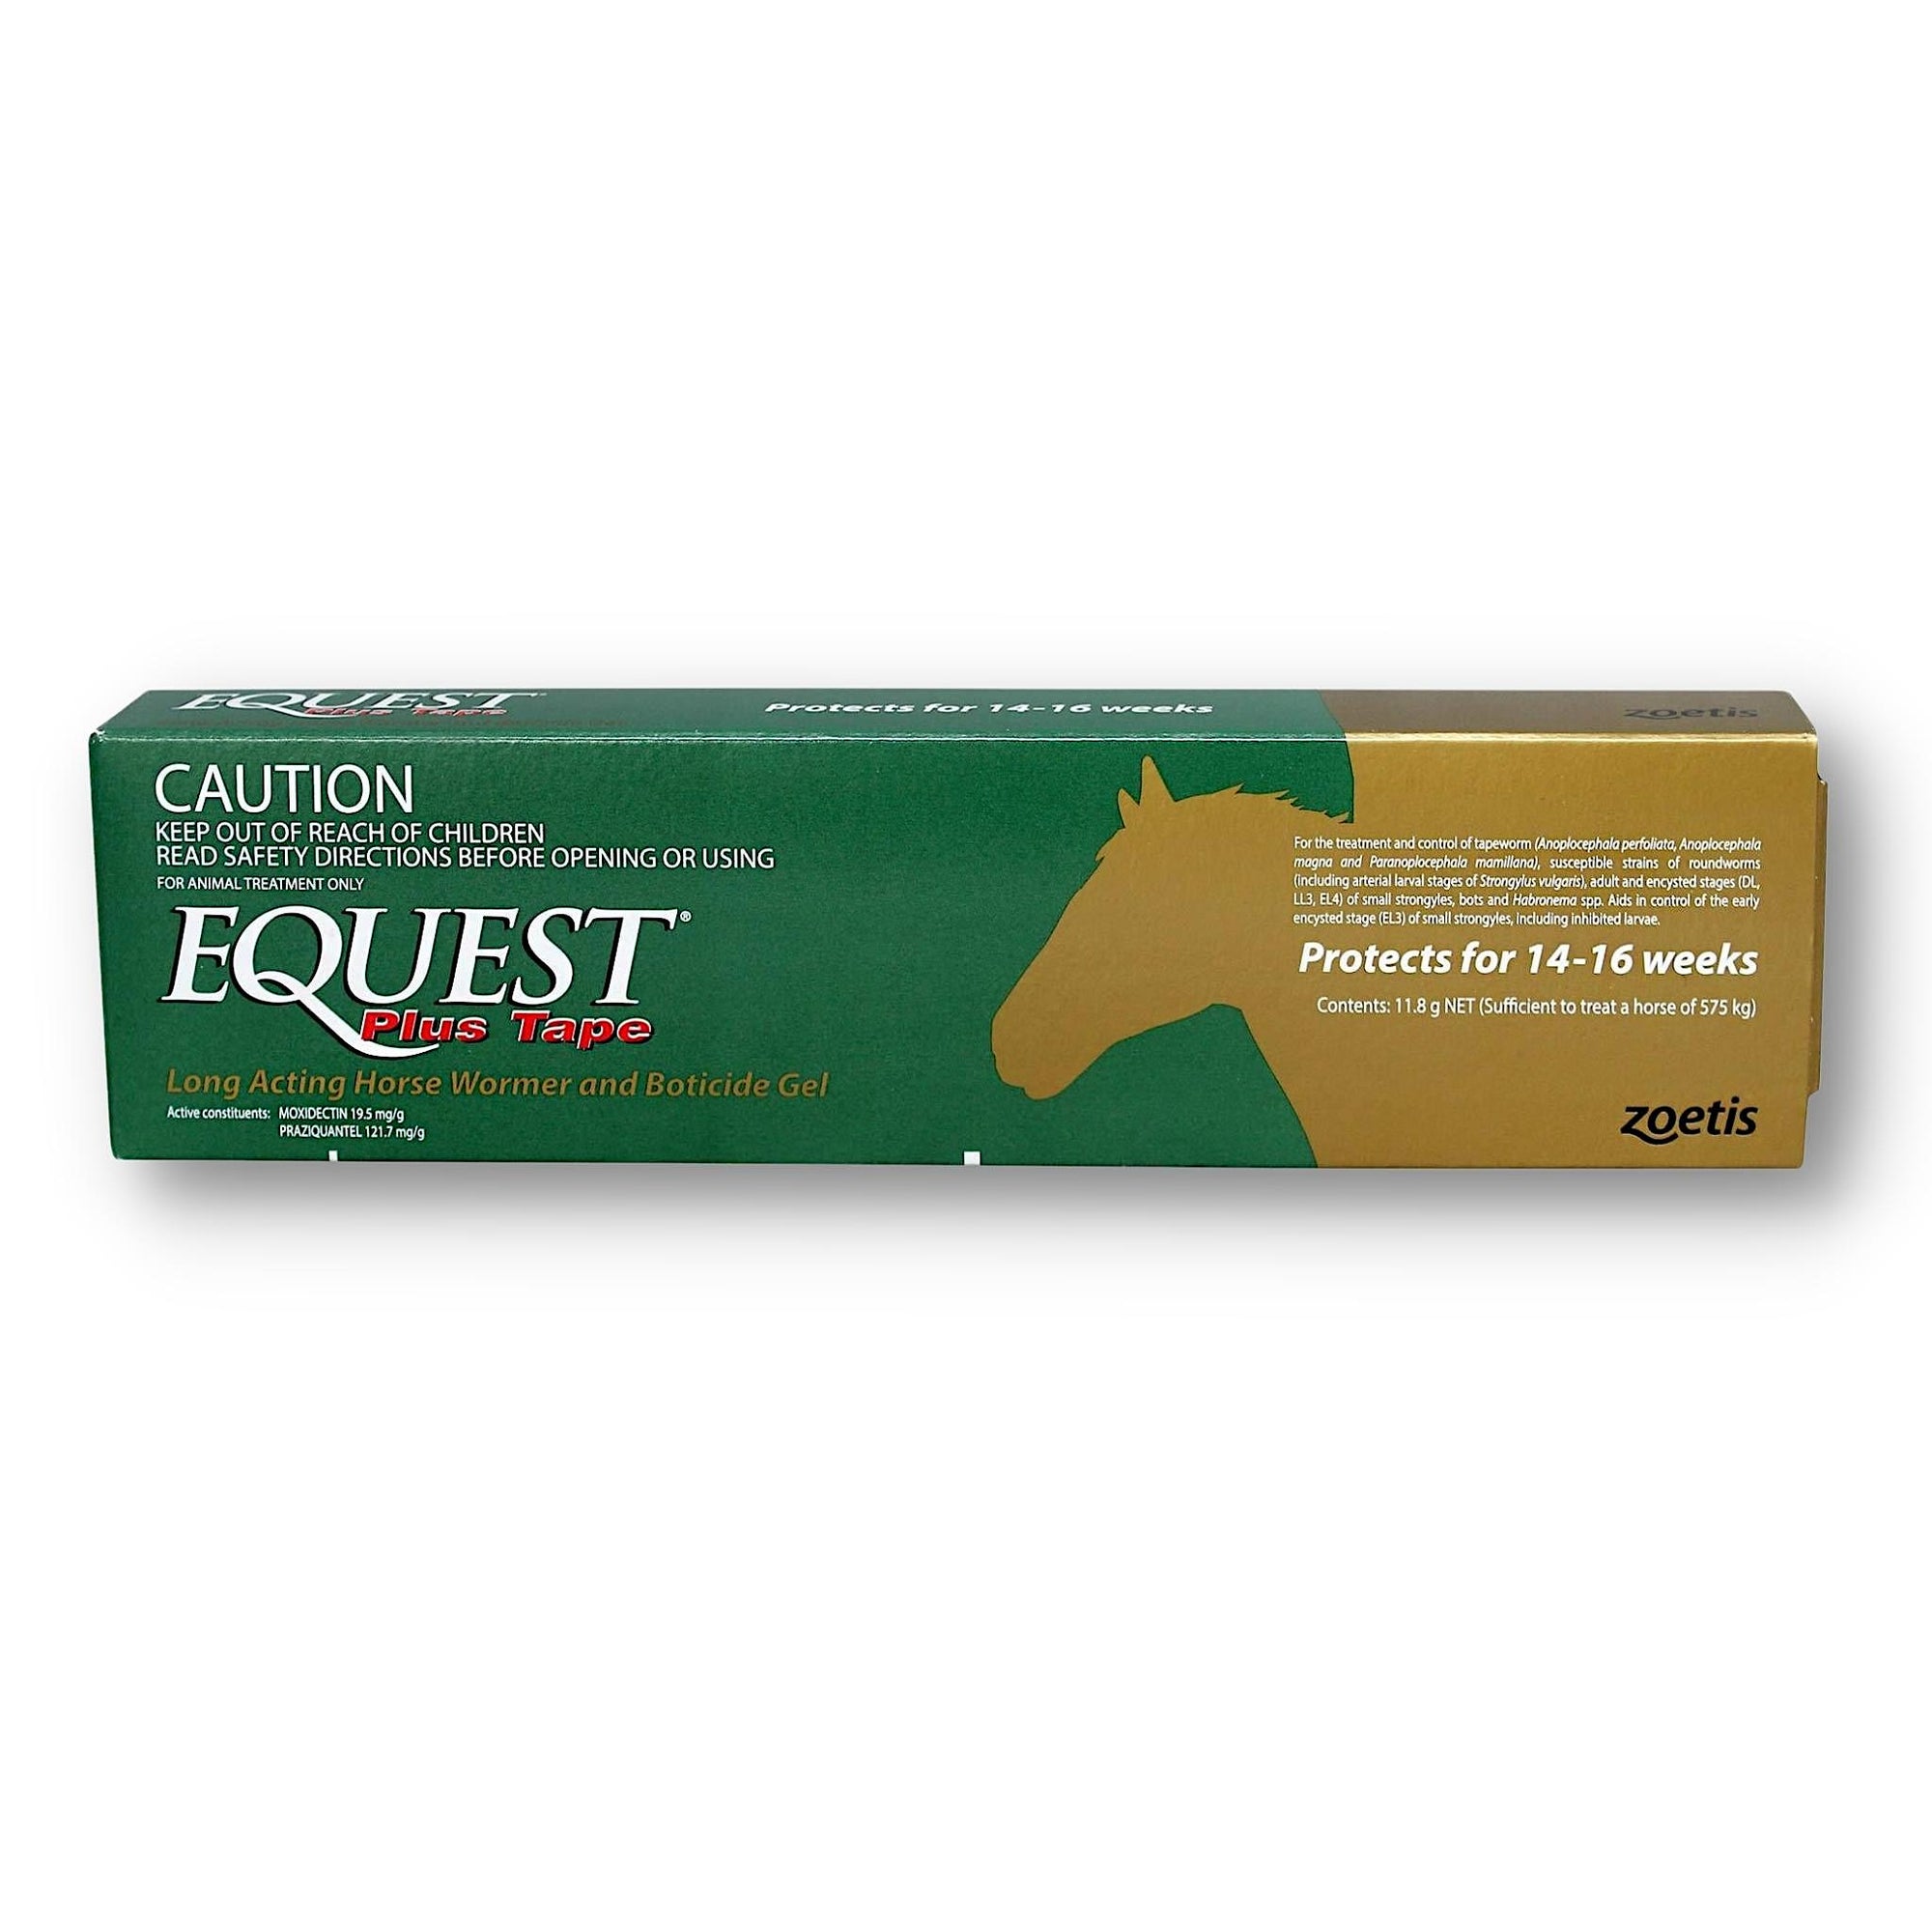 Green and gold box of product with writing and horse head silhouette. 